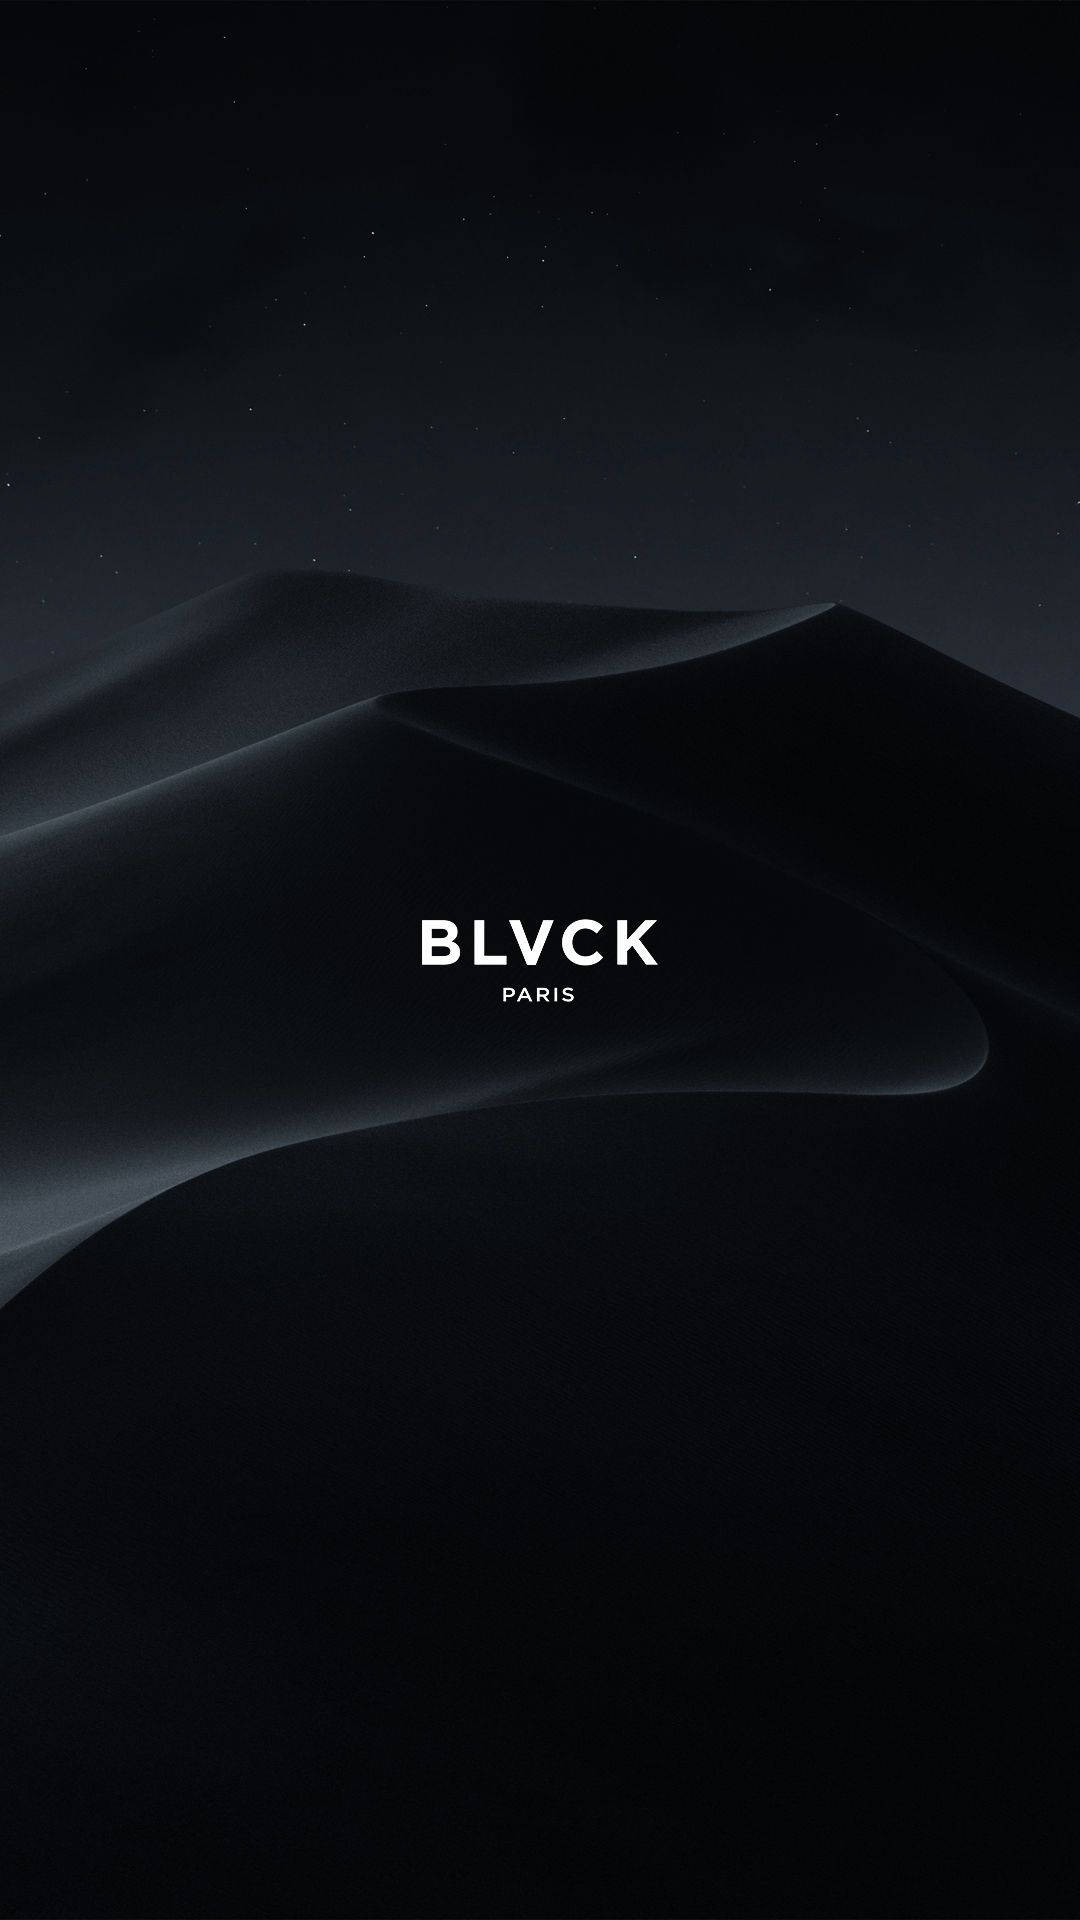 Look Sophisticated And Chic With The Modern And Stylish Clothing From Blvck Paris. Wallpaper